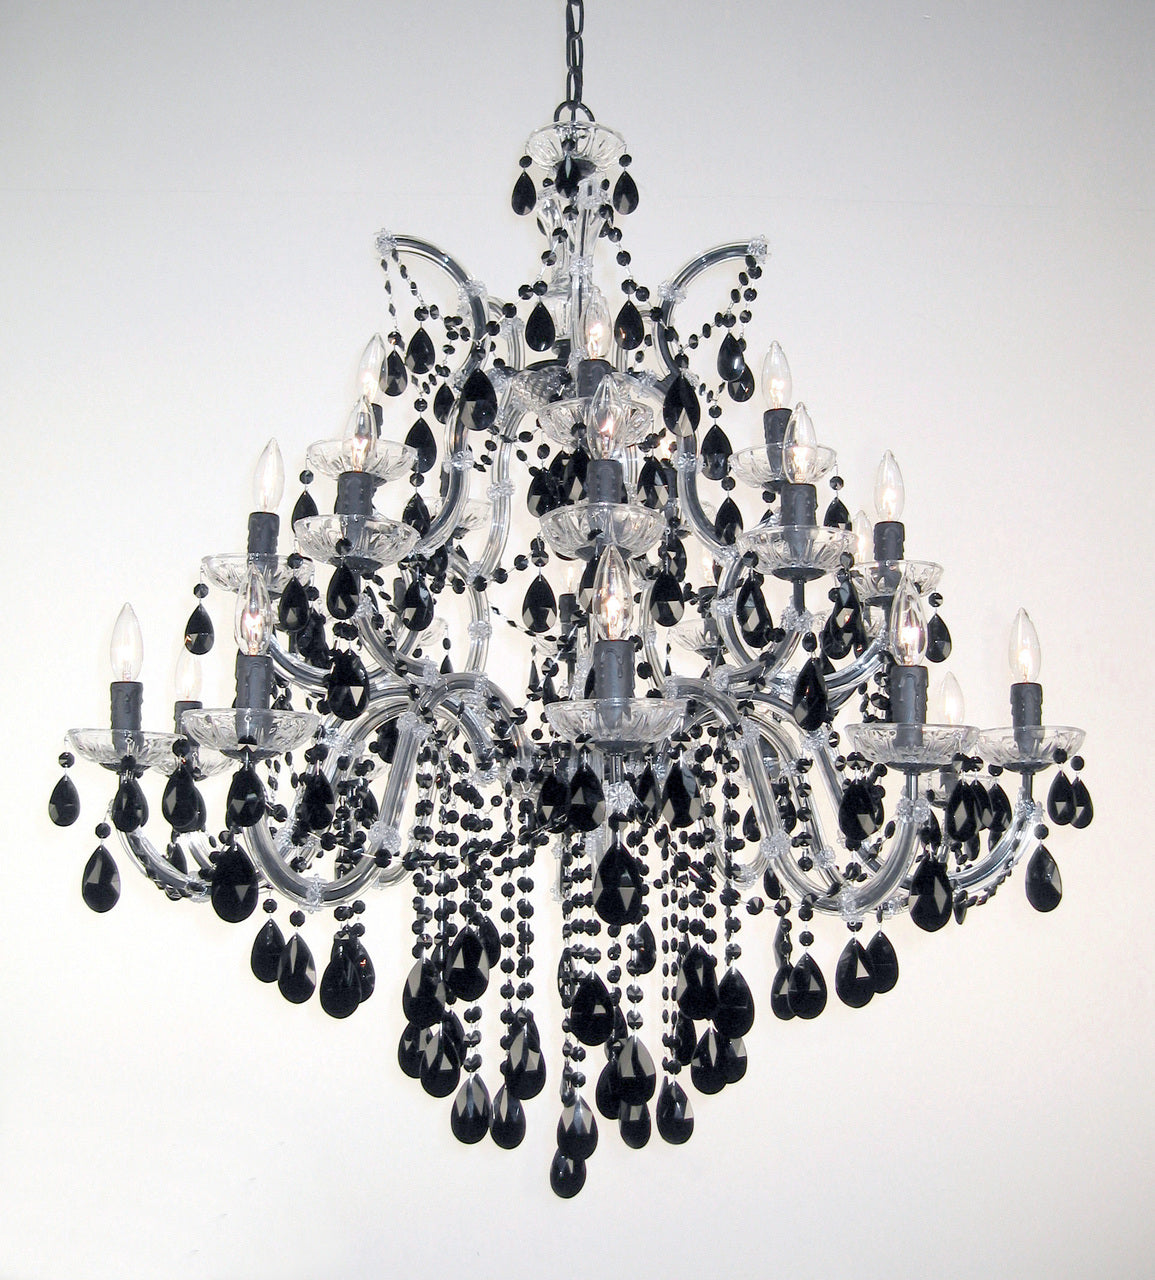 Classic Lighting 8349 BLK SJT Rialto Traditional Crystal Chandelier in Black